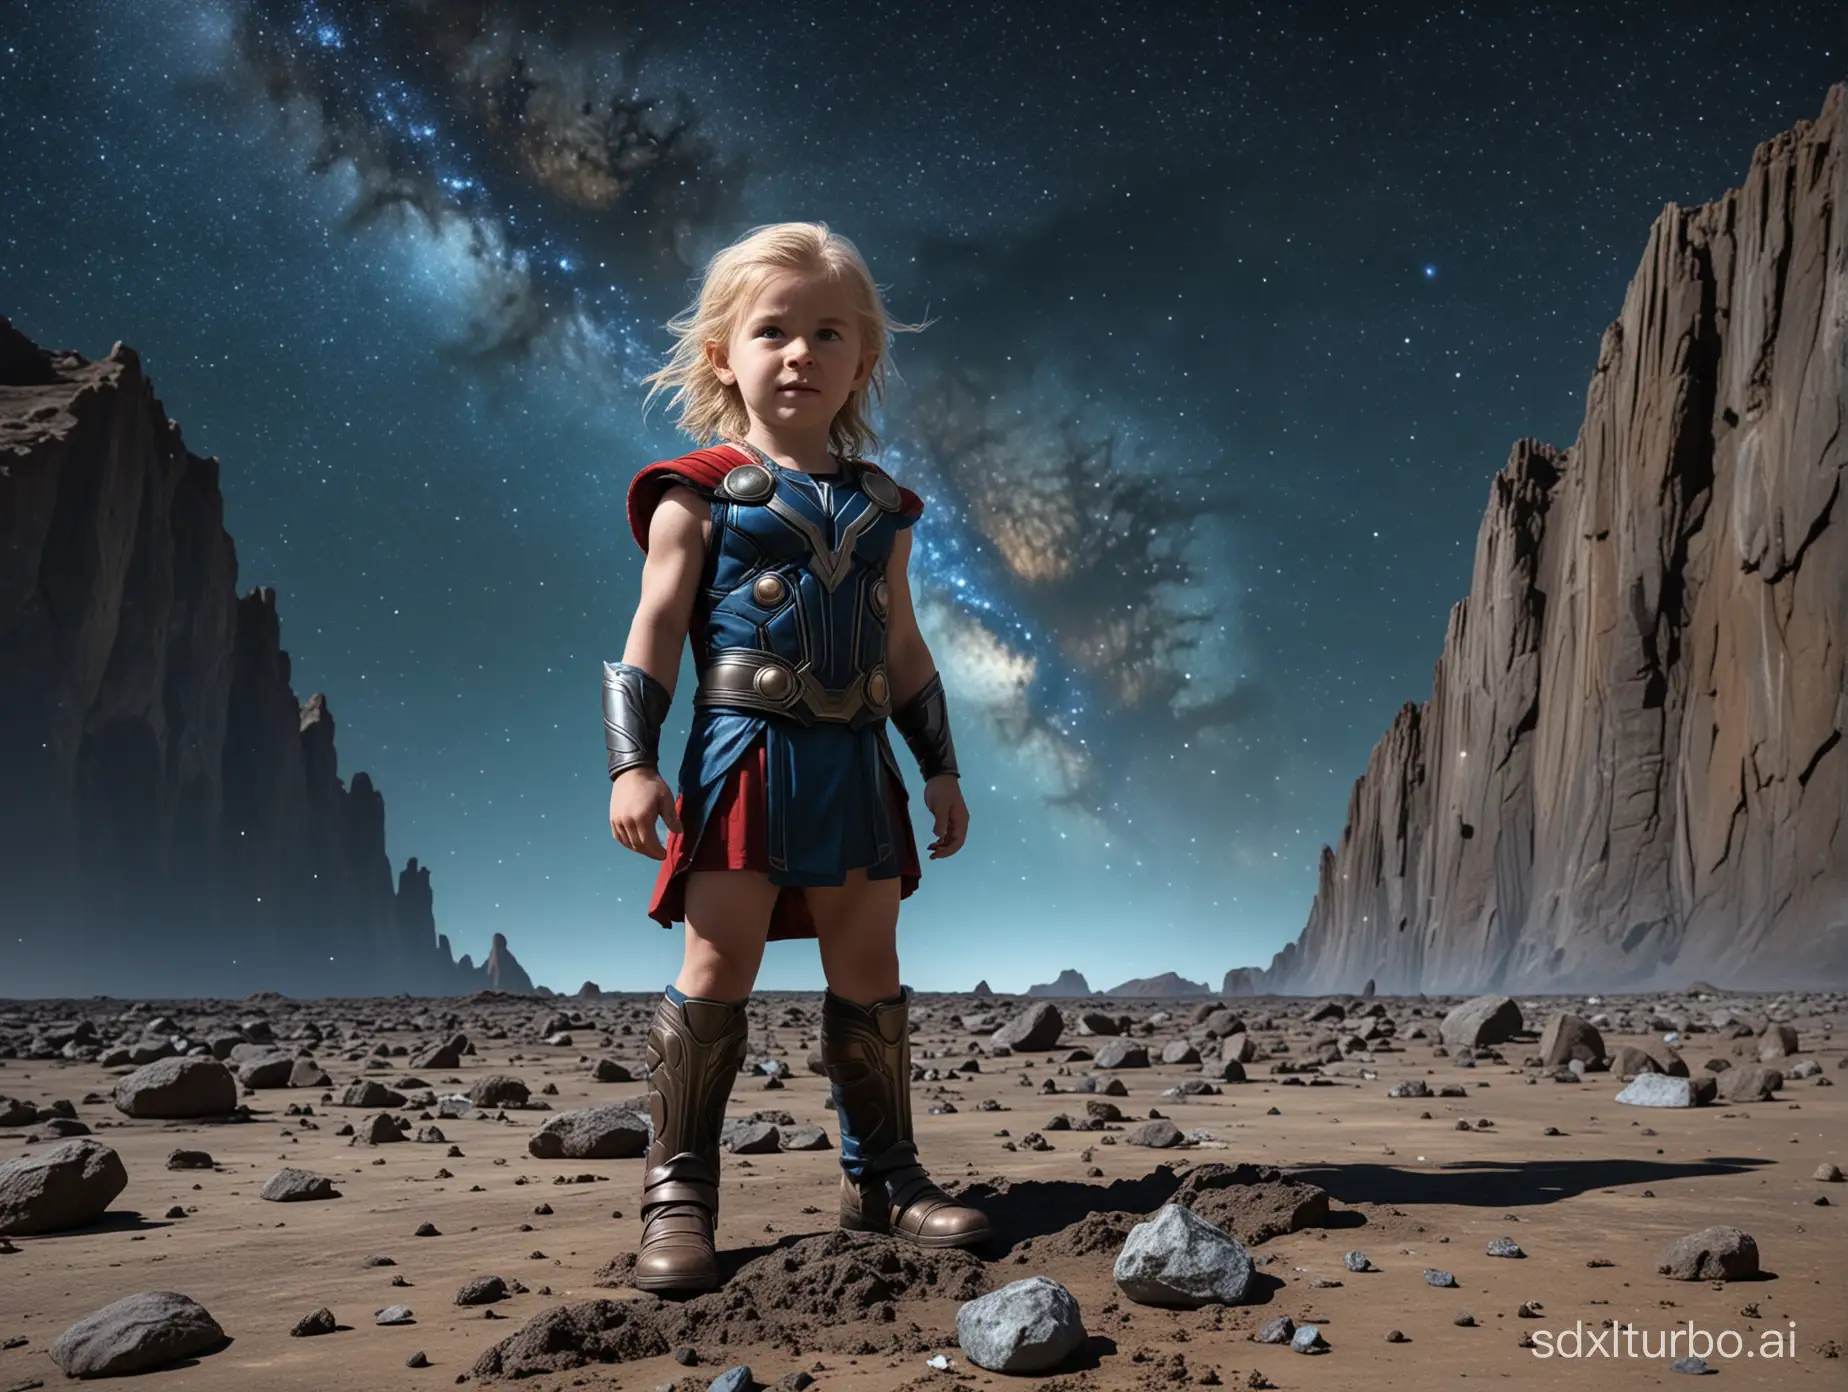 Child-Transforms-into-Thor-on-Lunar-Meteorite-with-Earth-Background